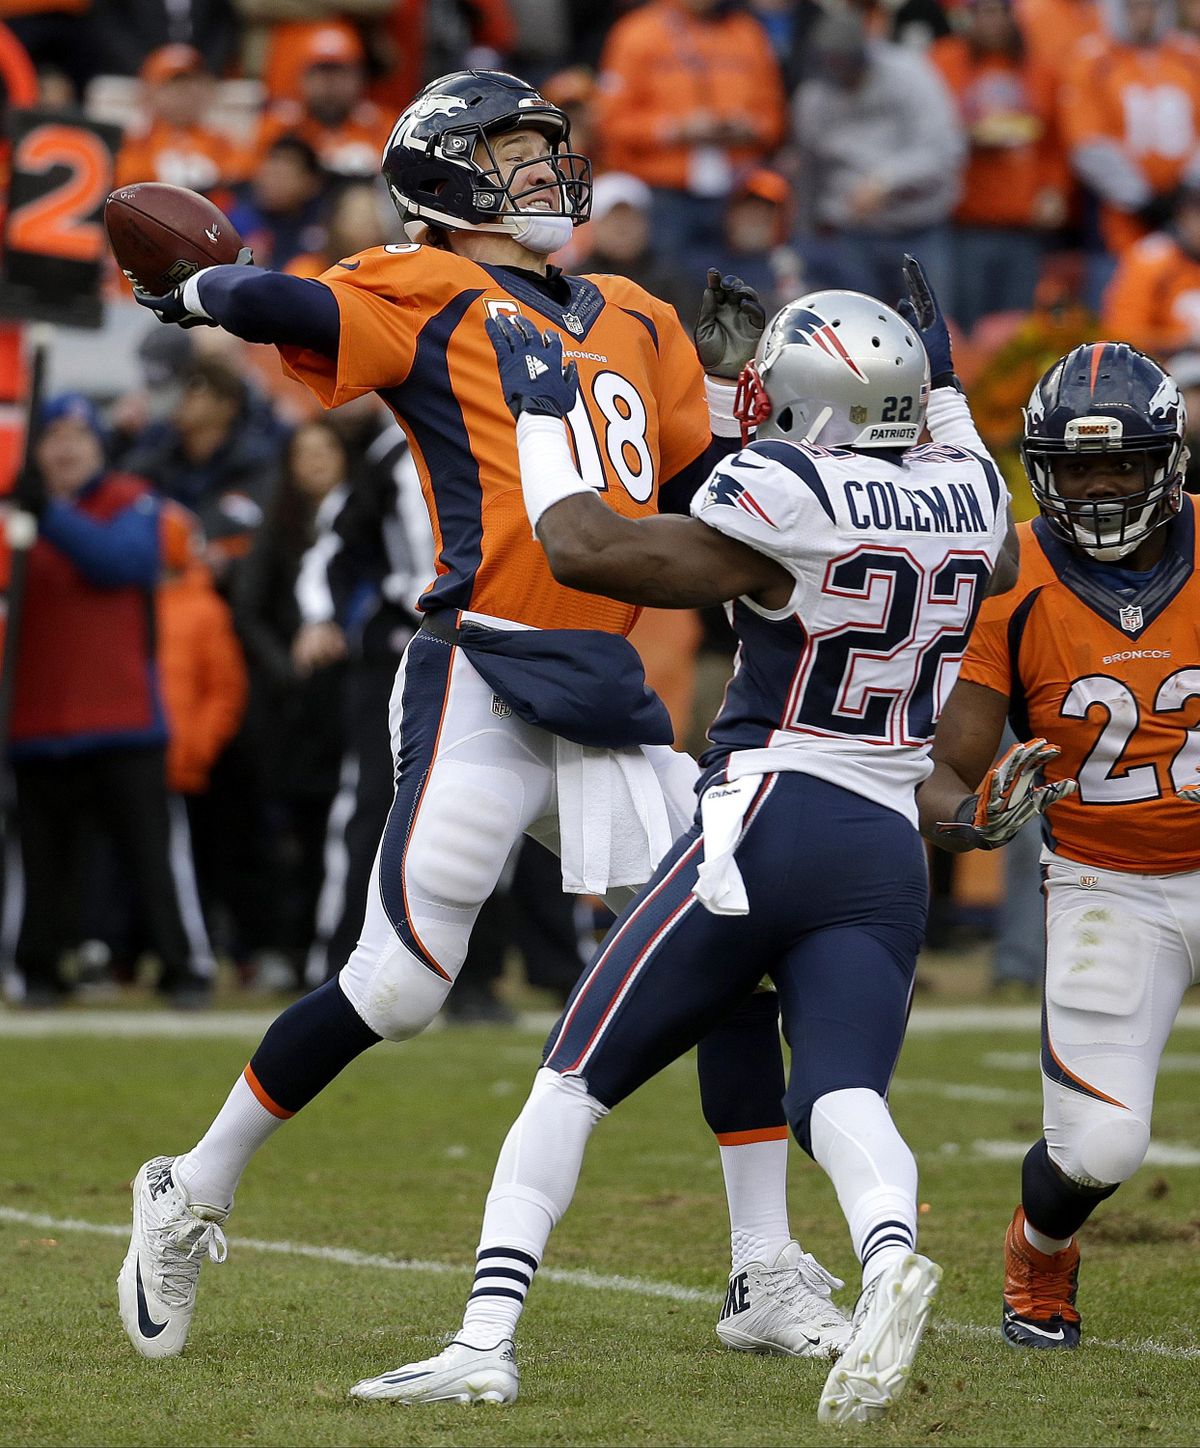 Denver Broncos quarterback Peyton Manning passes while being defended rushed by New England Patriots cornerback Justin Coleman (22) during the second half of the NFL football AFC Championship game between the Denver Broncos and the New England Patriots, Sunday, Jan. 24, 2016, in Denver. (AP / AP)